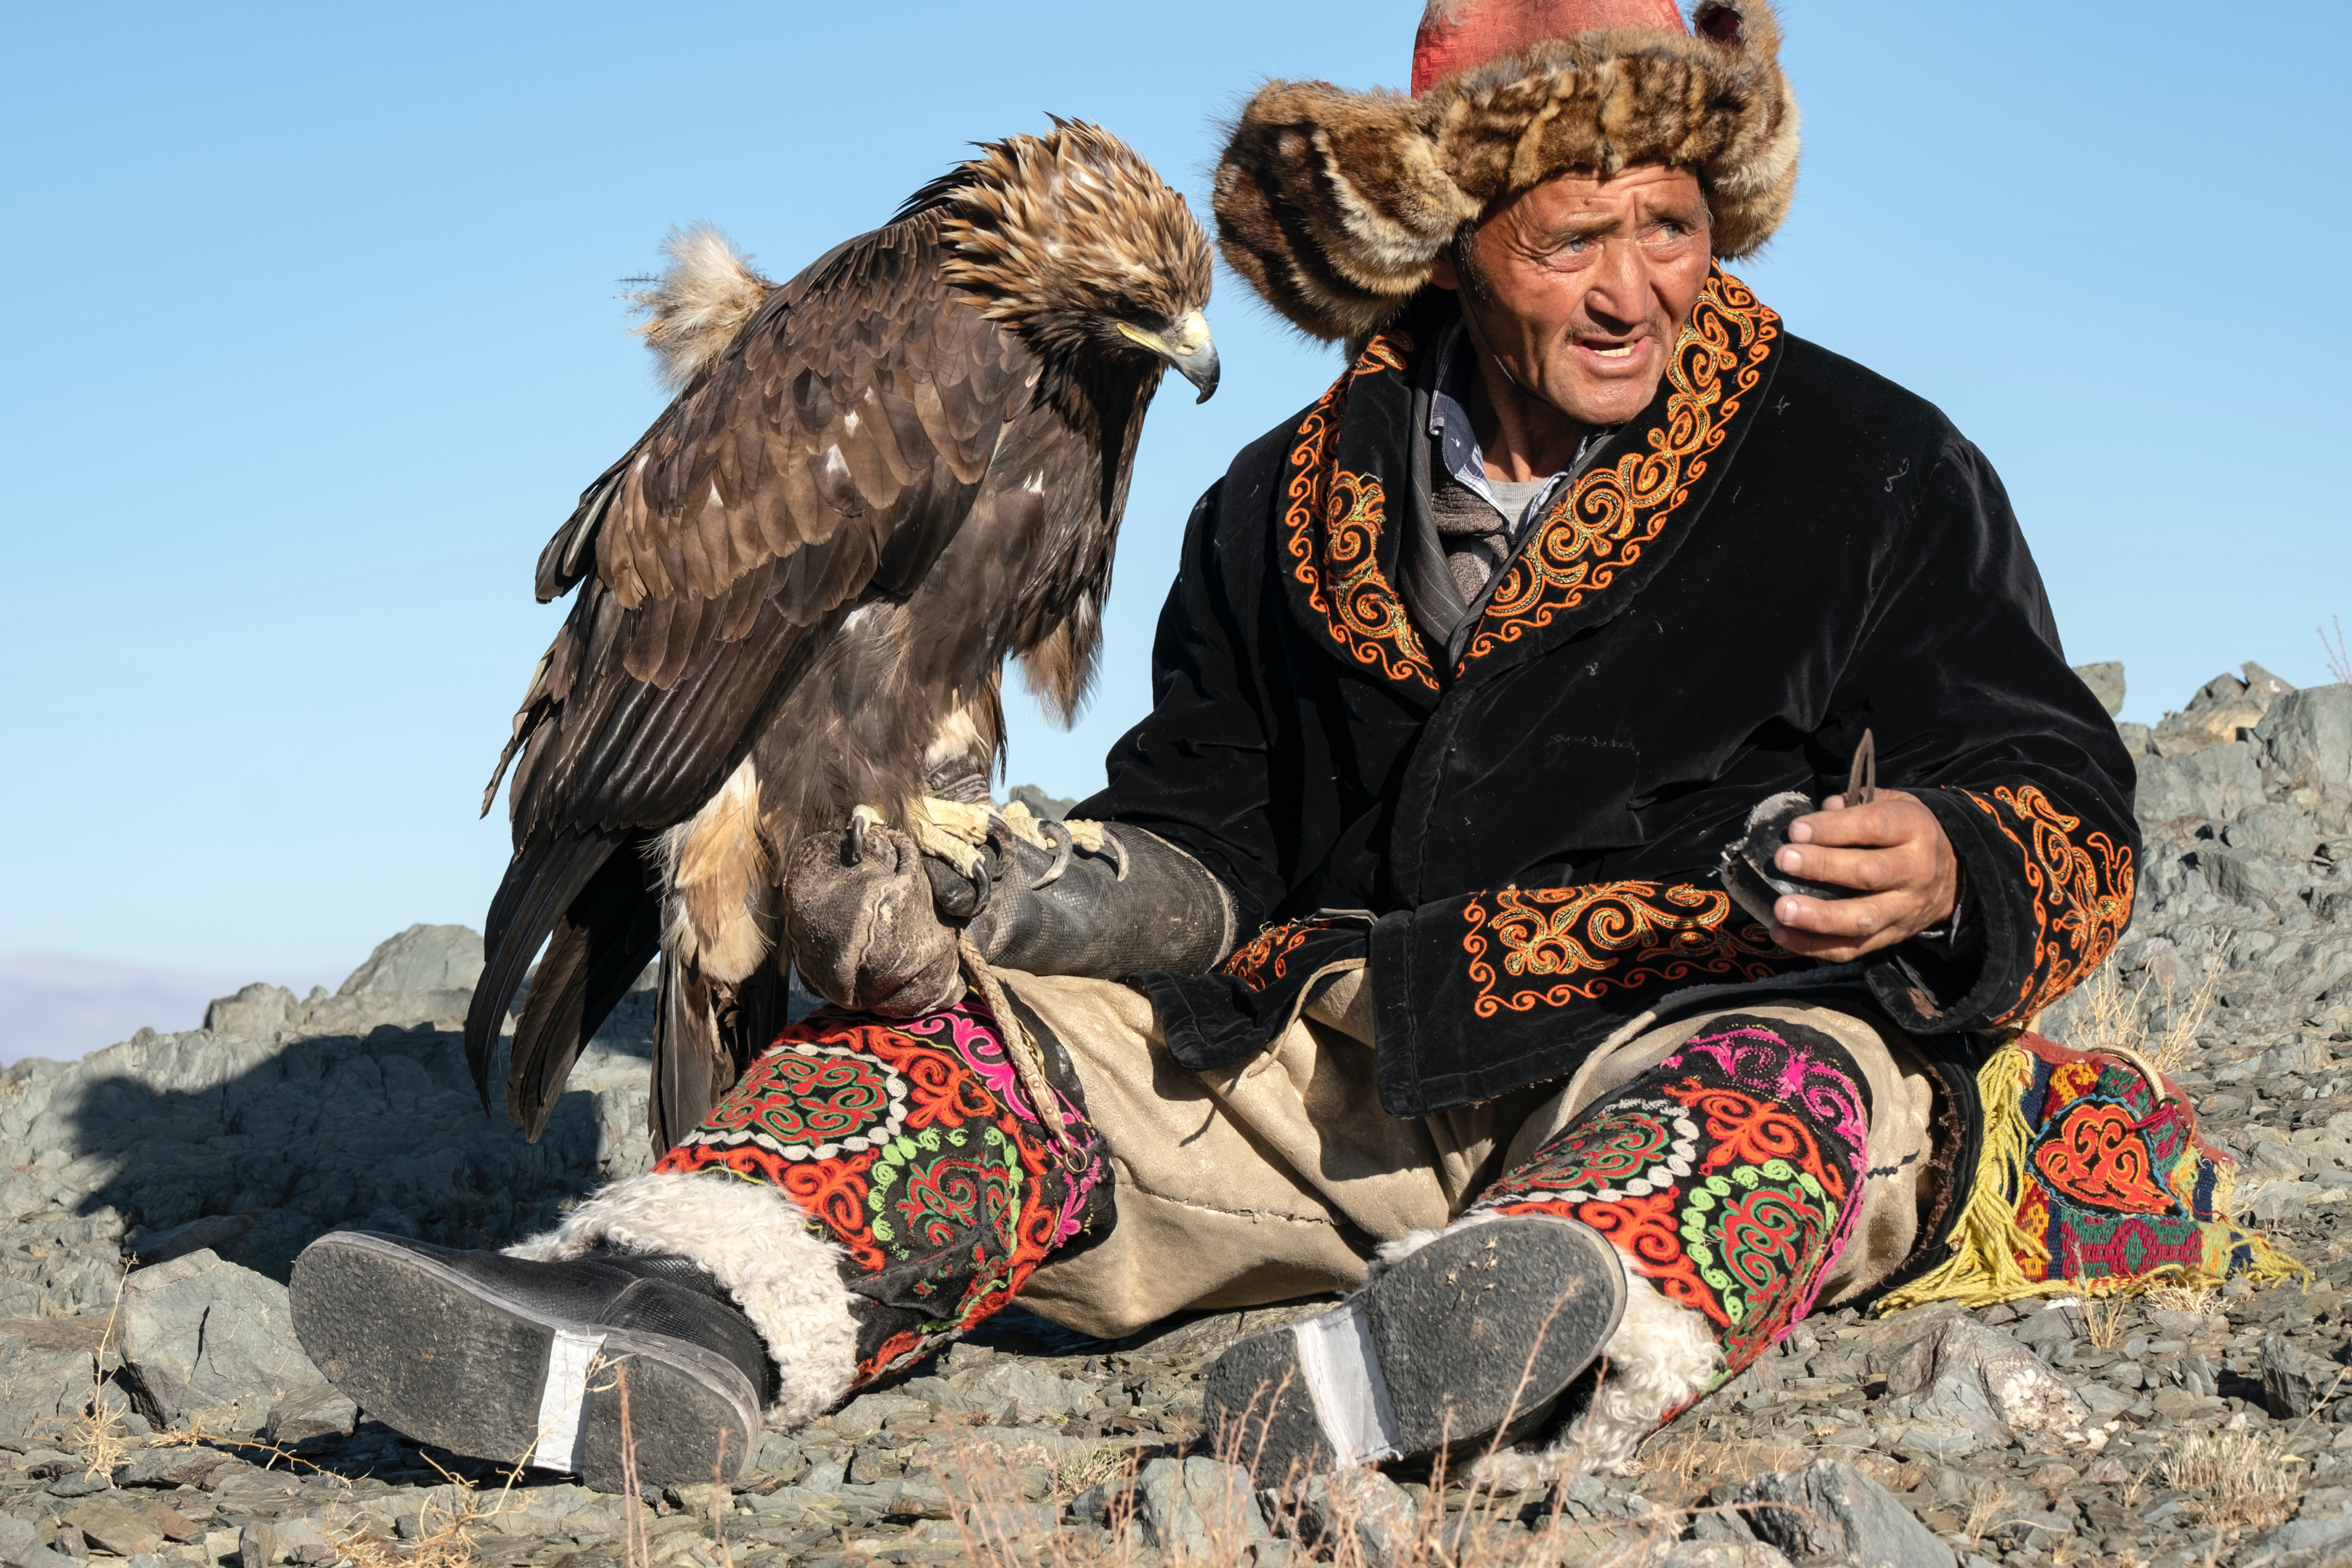 A stunning image of an eagle hunter from Ulgii, showcasing the rich Eagle Hunting Heritage of the region.